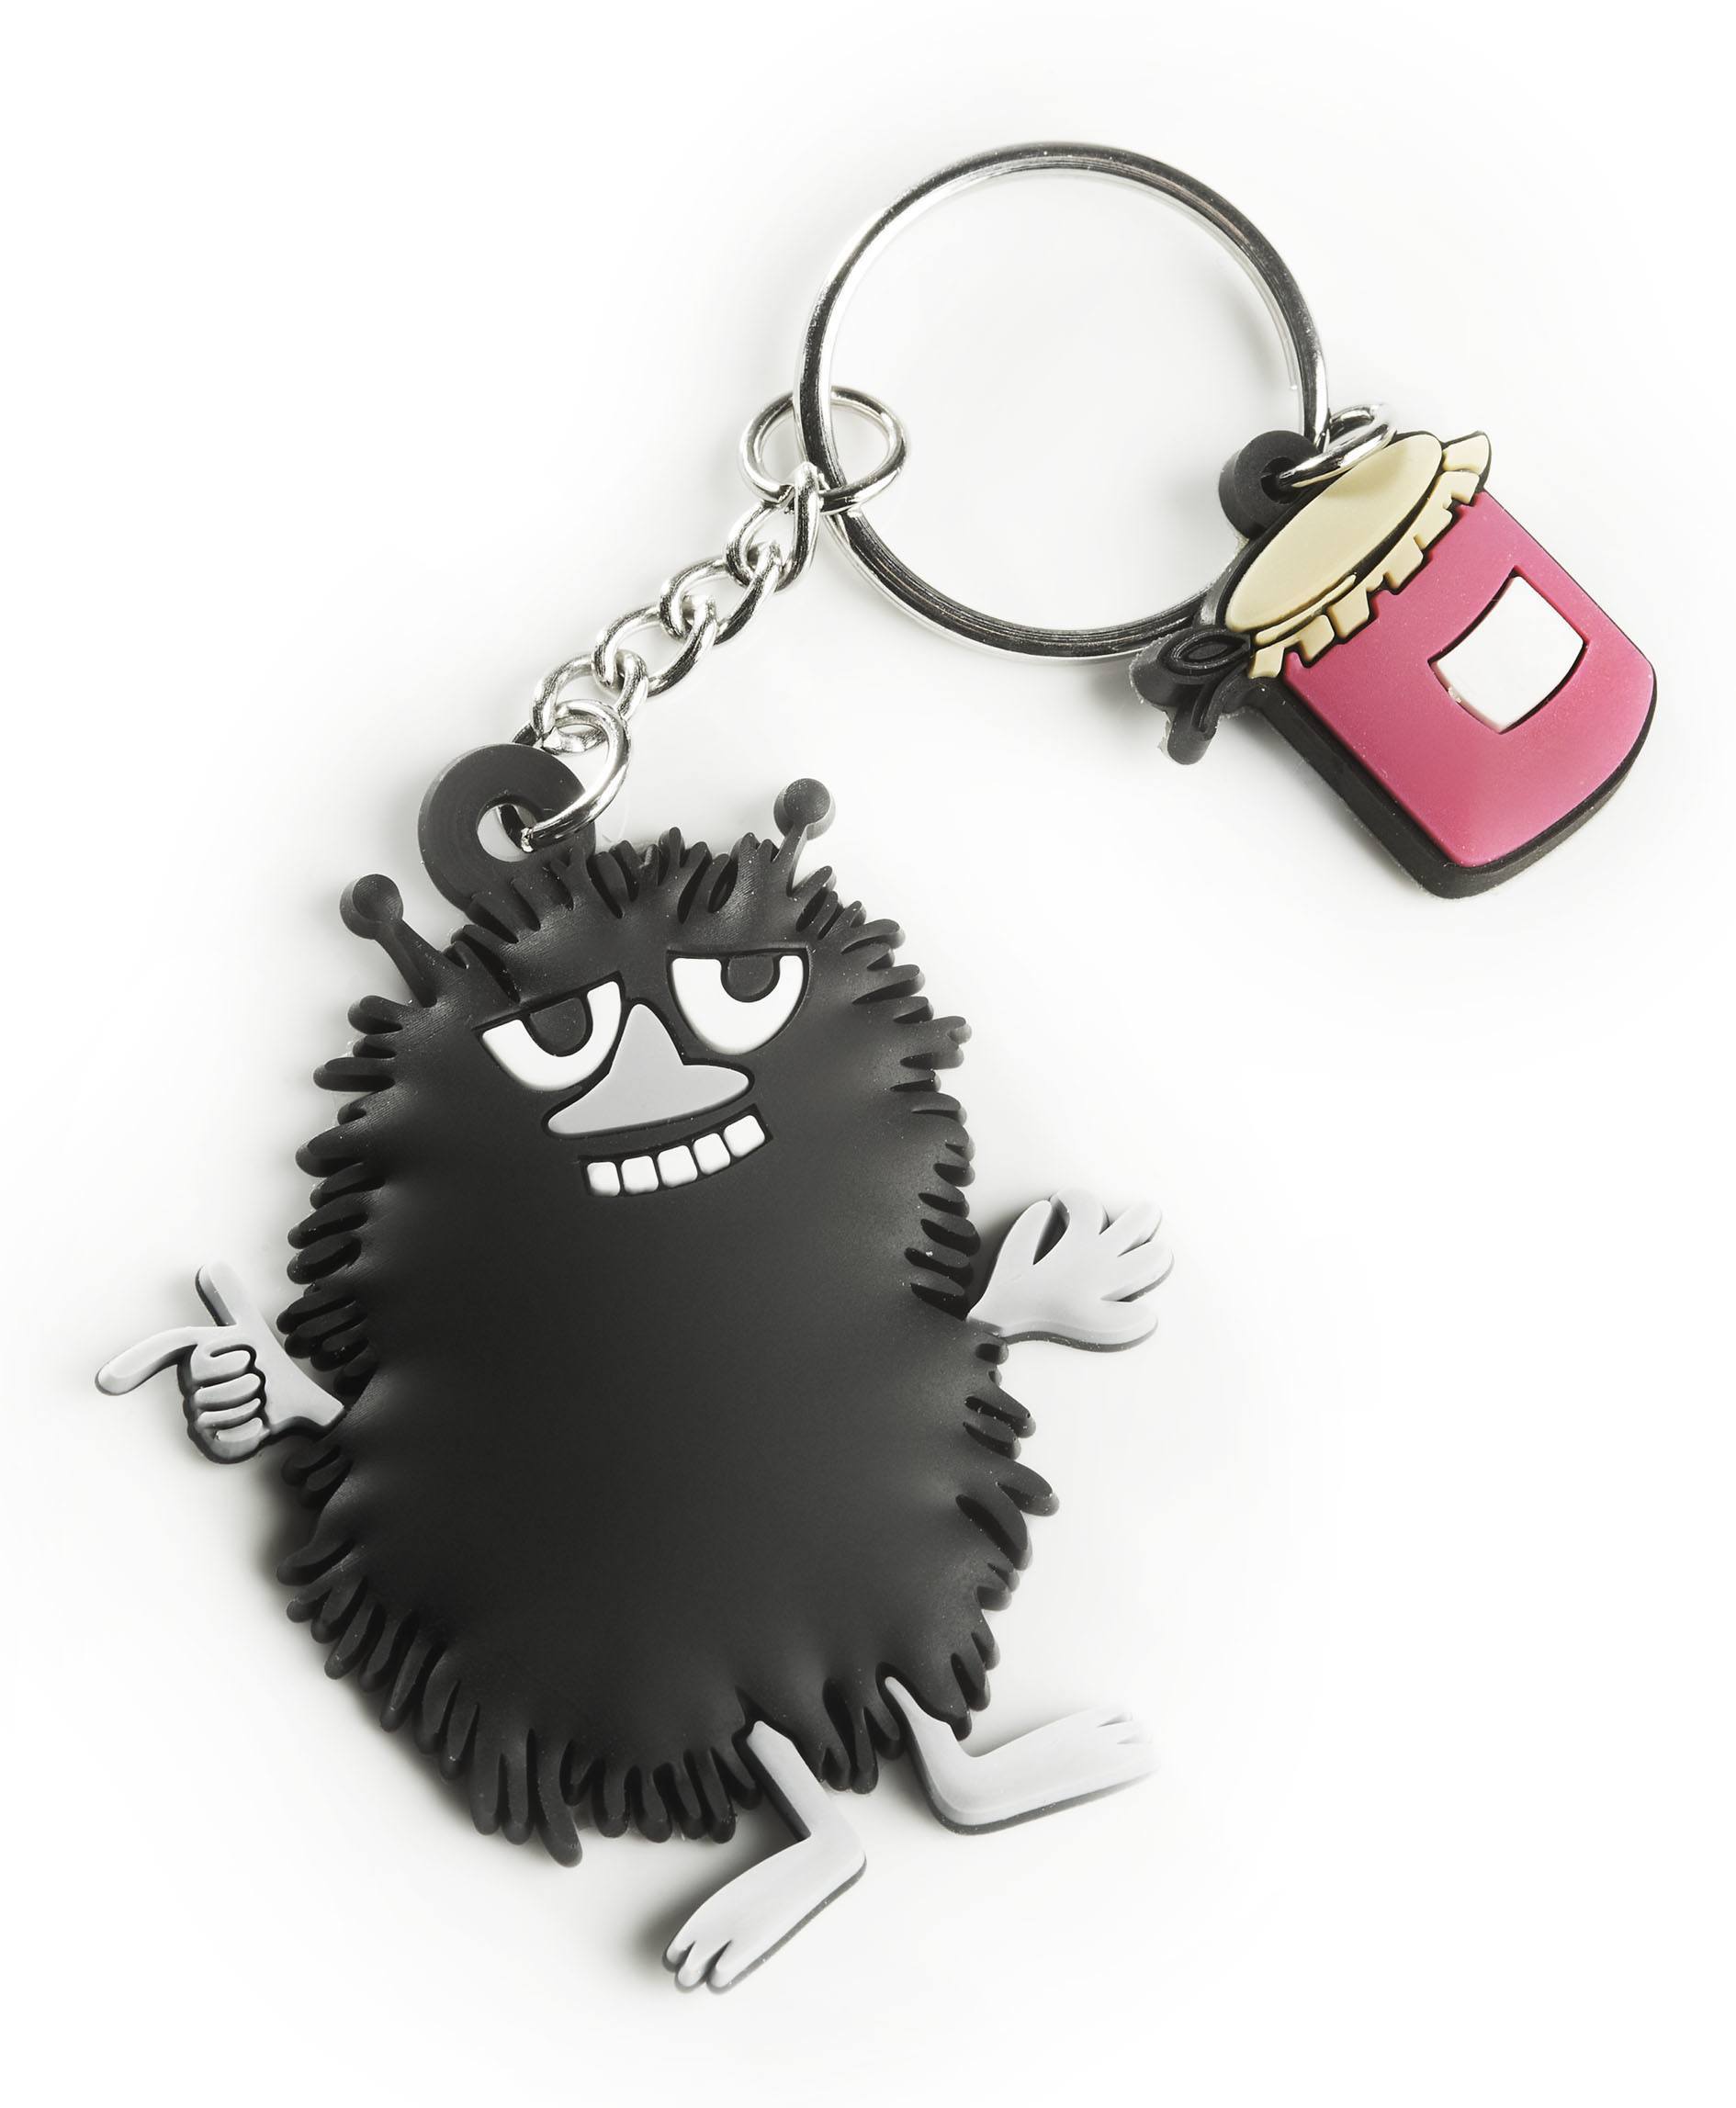 CAILAP KEY RING WITH STINKY